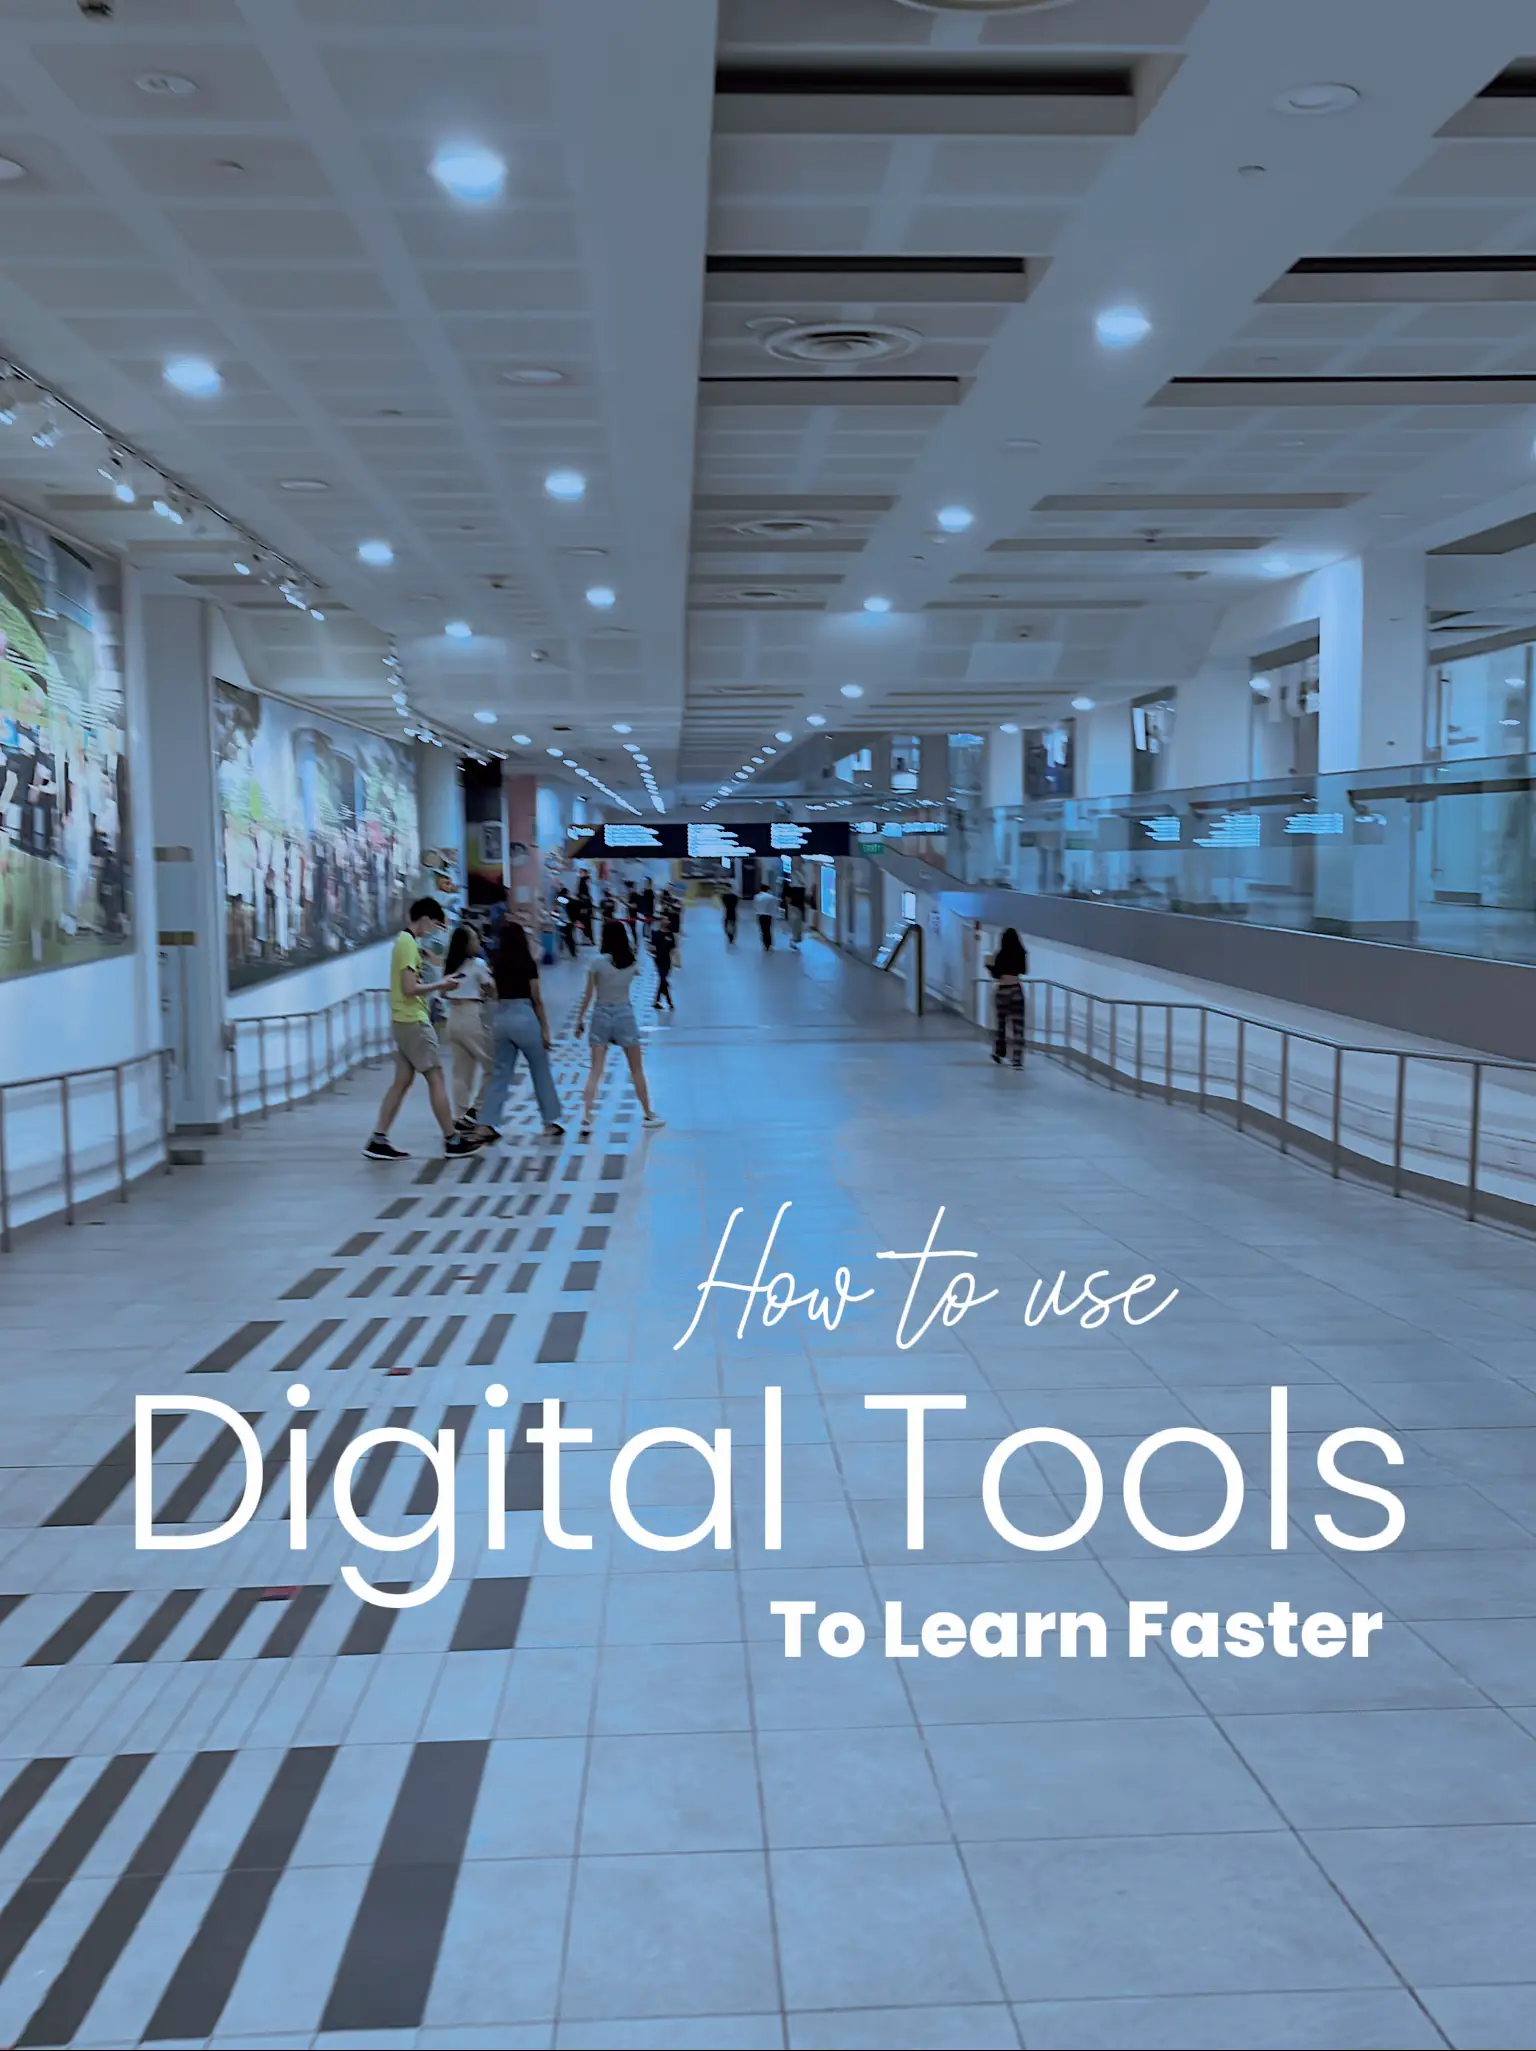 ✨How to use Digital Tools to Learn Faster 's images